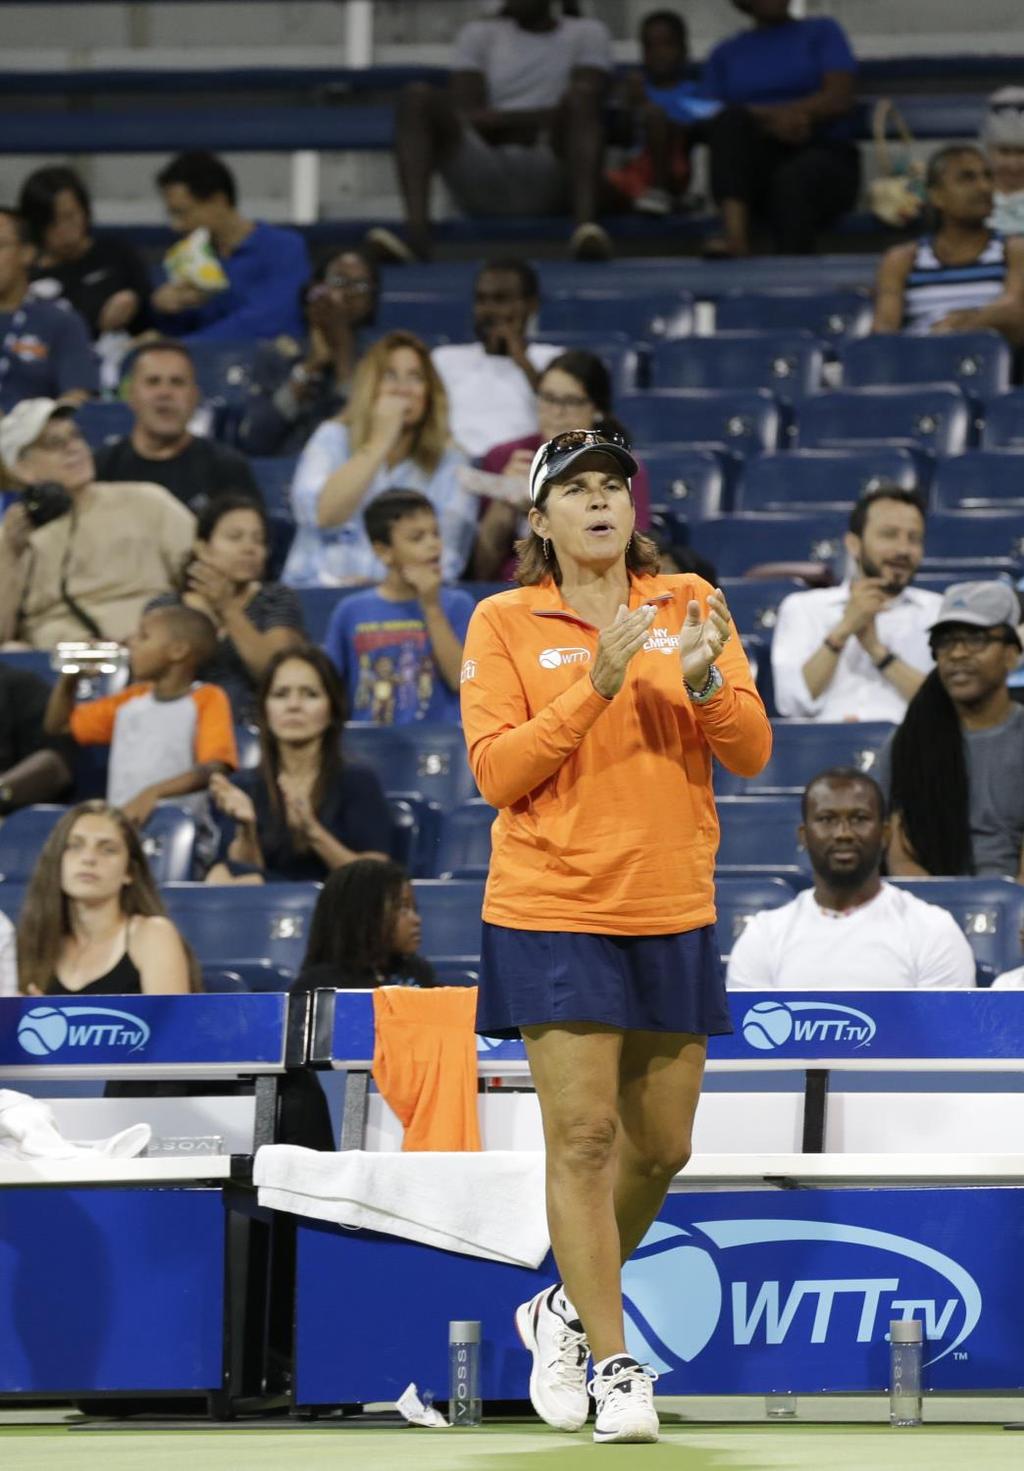 Our Coach The only female coach in the league, Gigi Fernandez coached her second season with the Empire Gigi Fernandez, born in San Juan, Puerto Rico, burst onto the tennis scene by reaching the NCAA